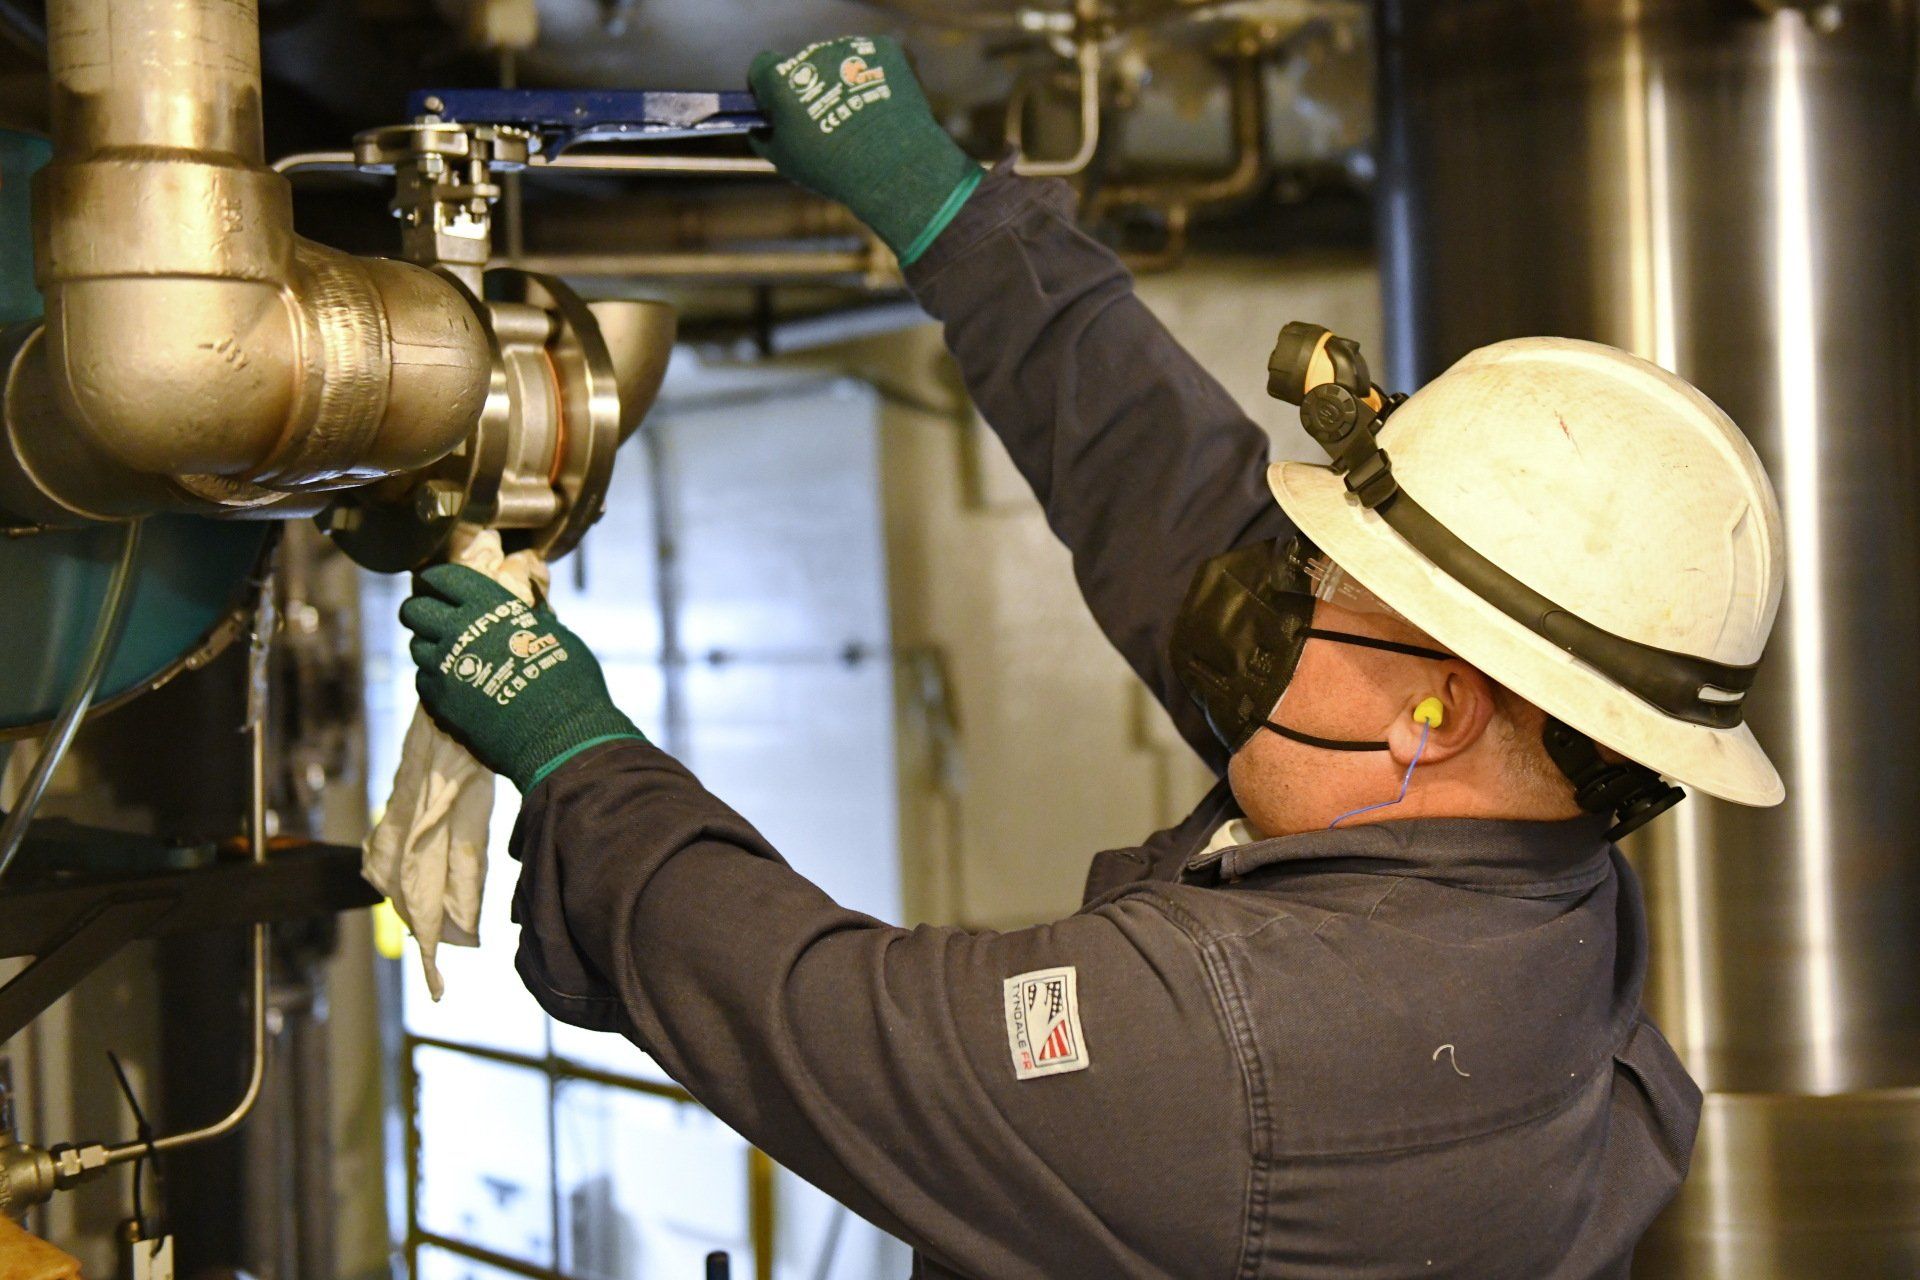 Local 538 apprentice fitting a pipe at Local 538 training hall after receiving industry certifications to nail the job